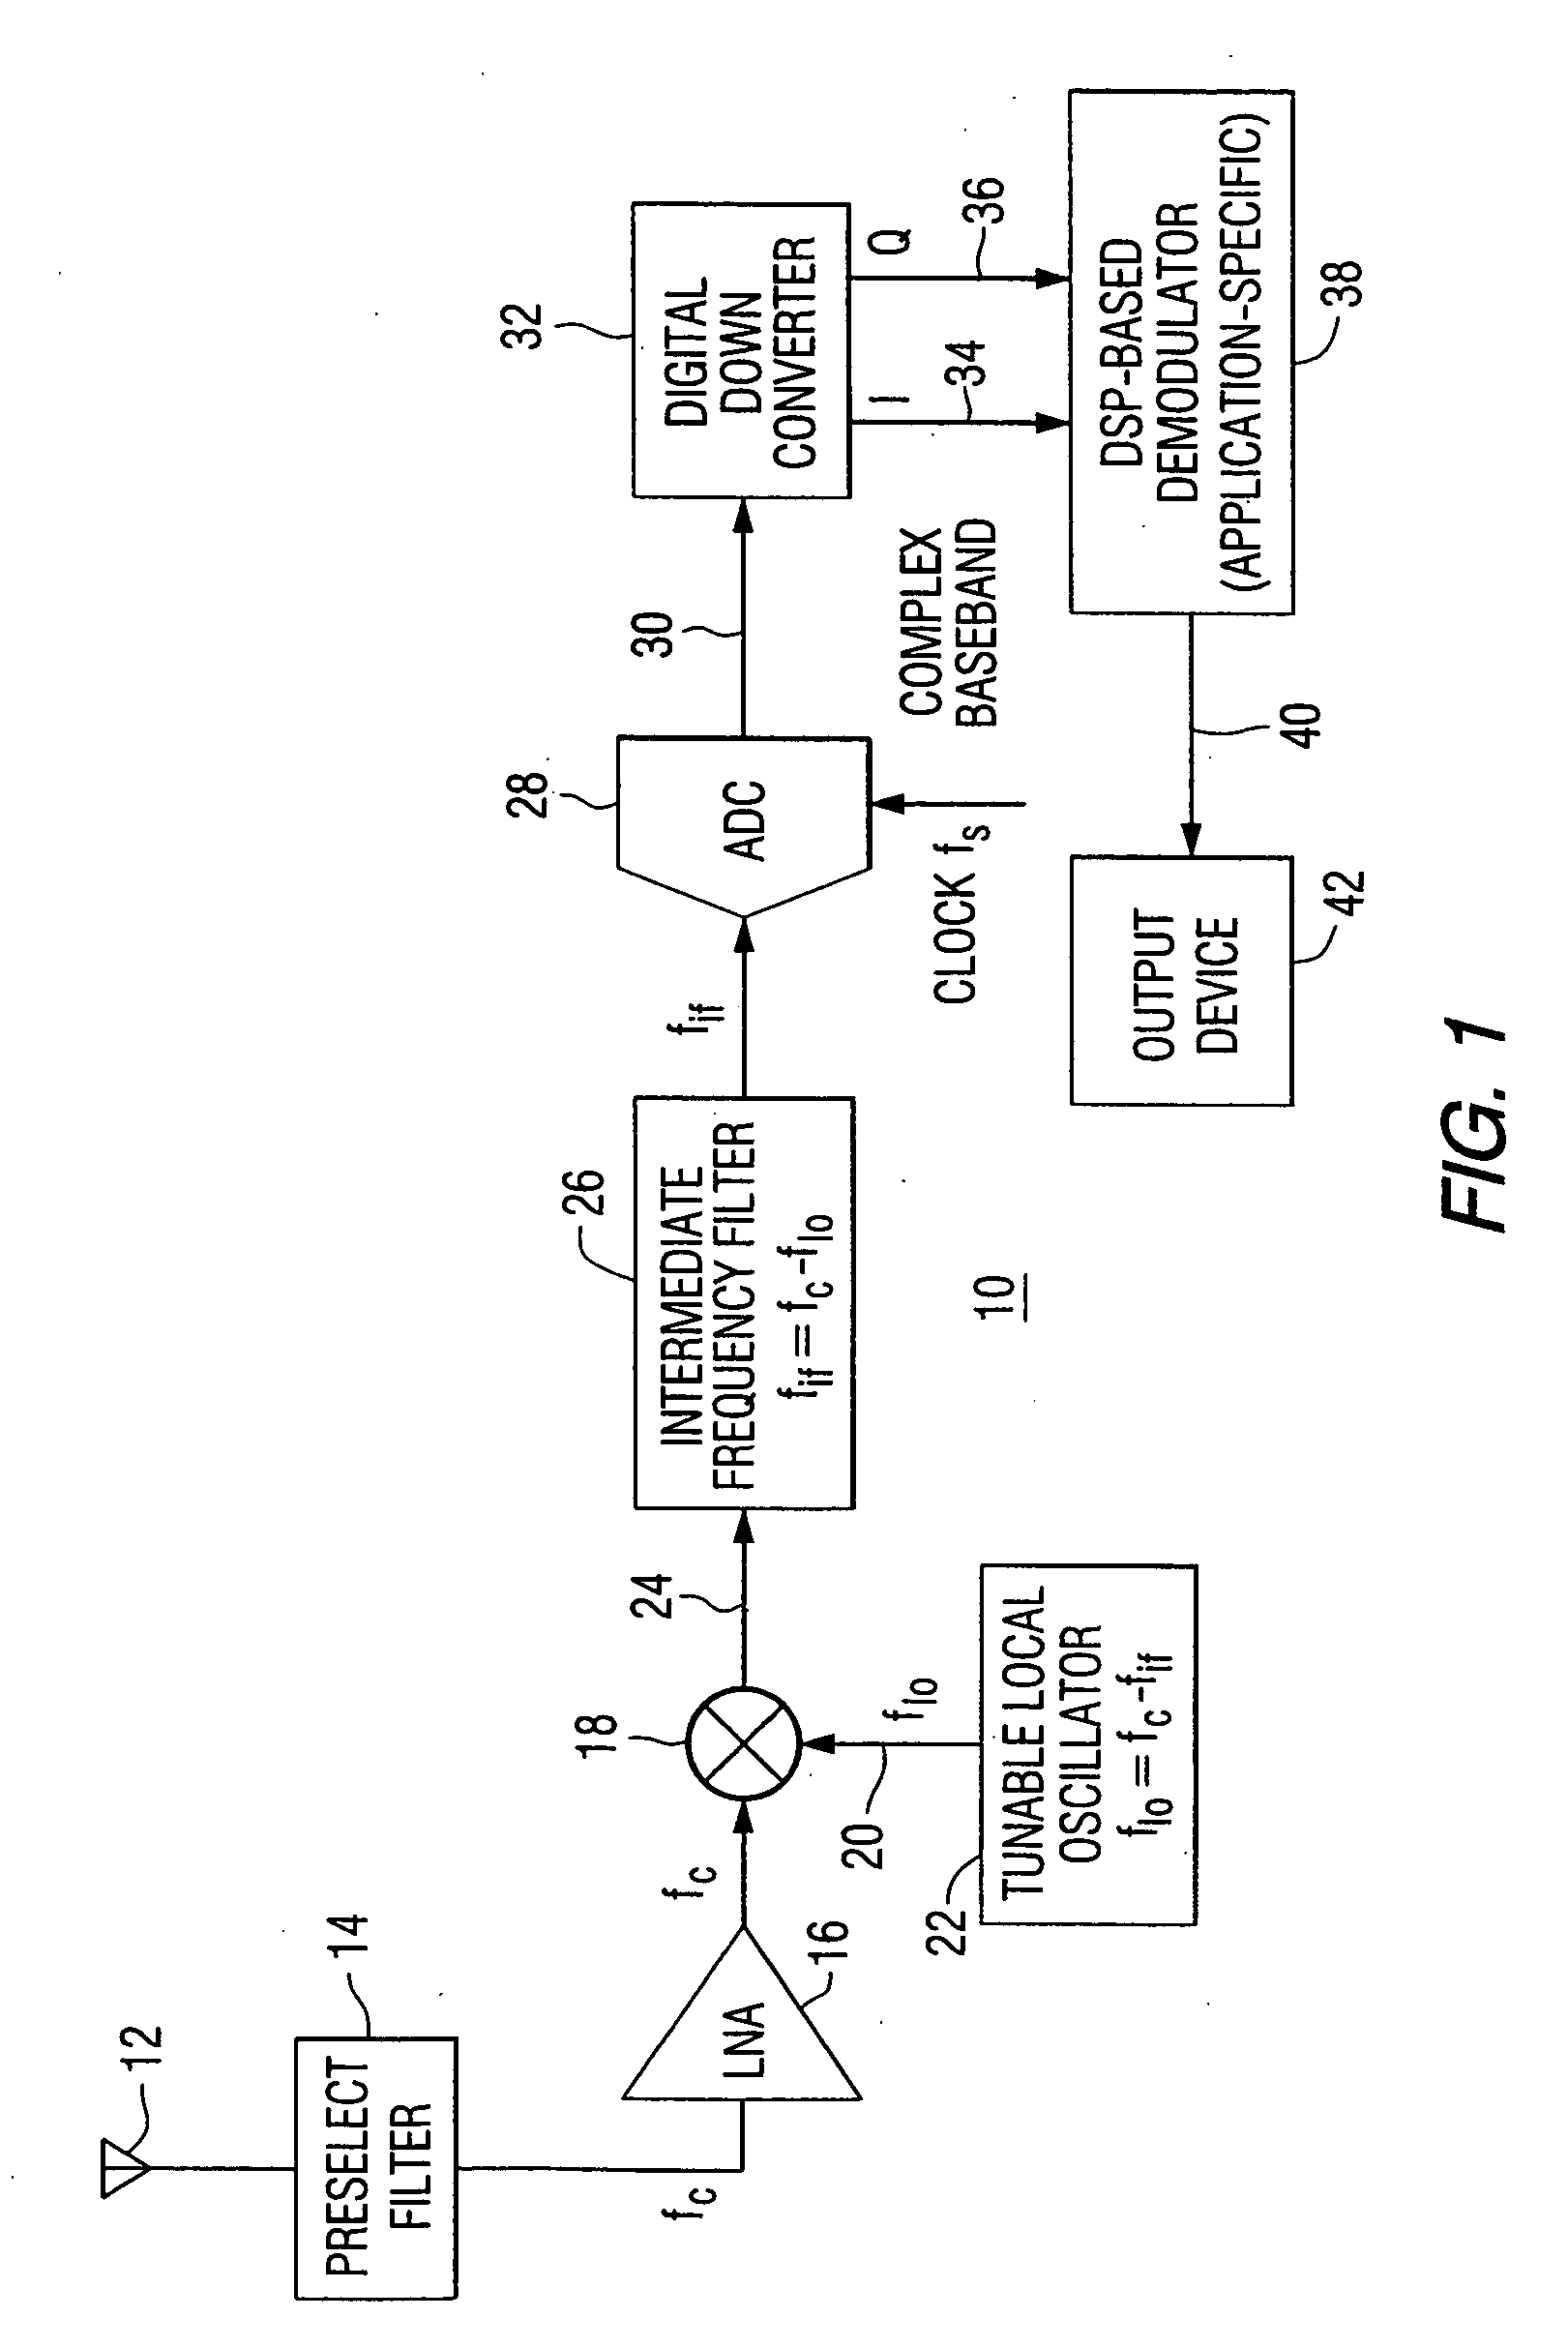 Method and apparatus for blending an audio signal in an in-band on-channel radio system